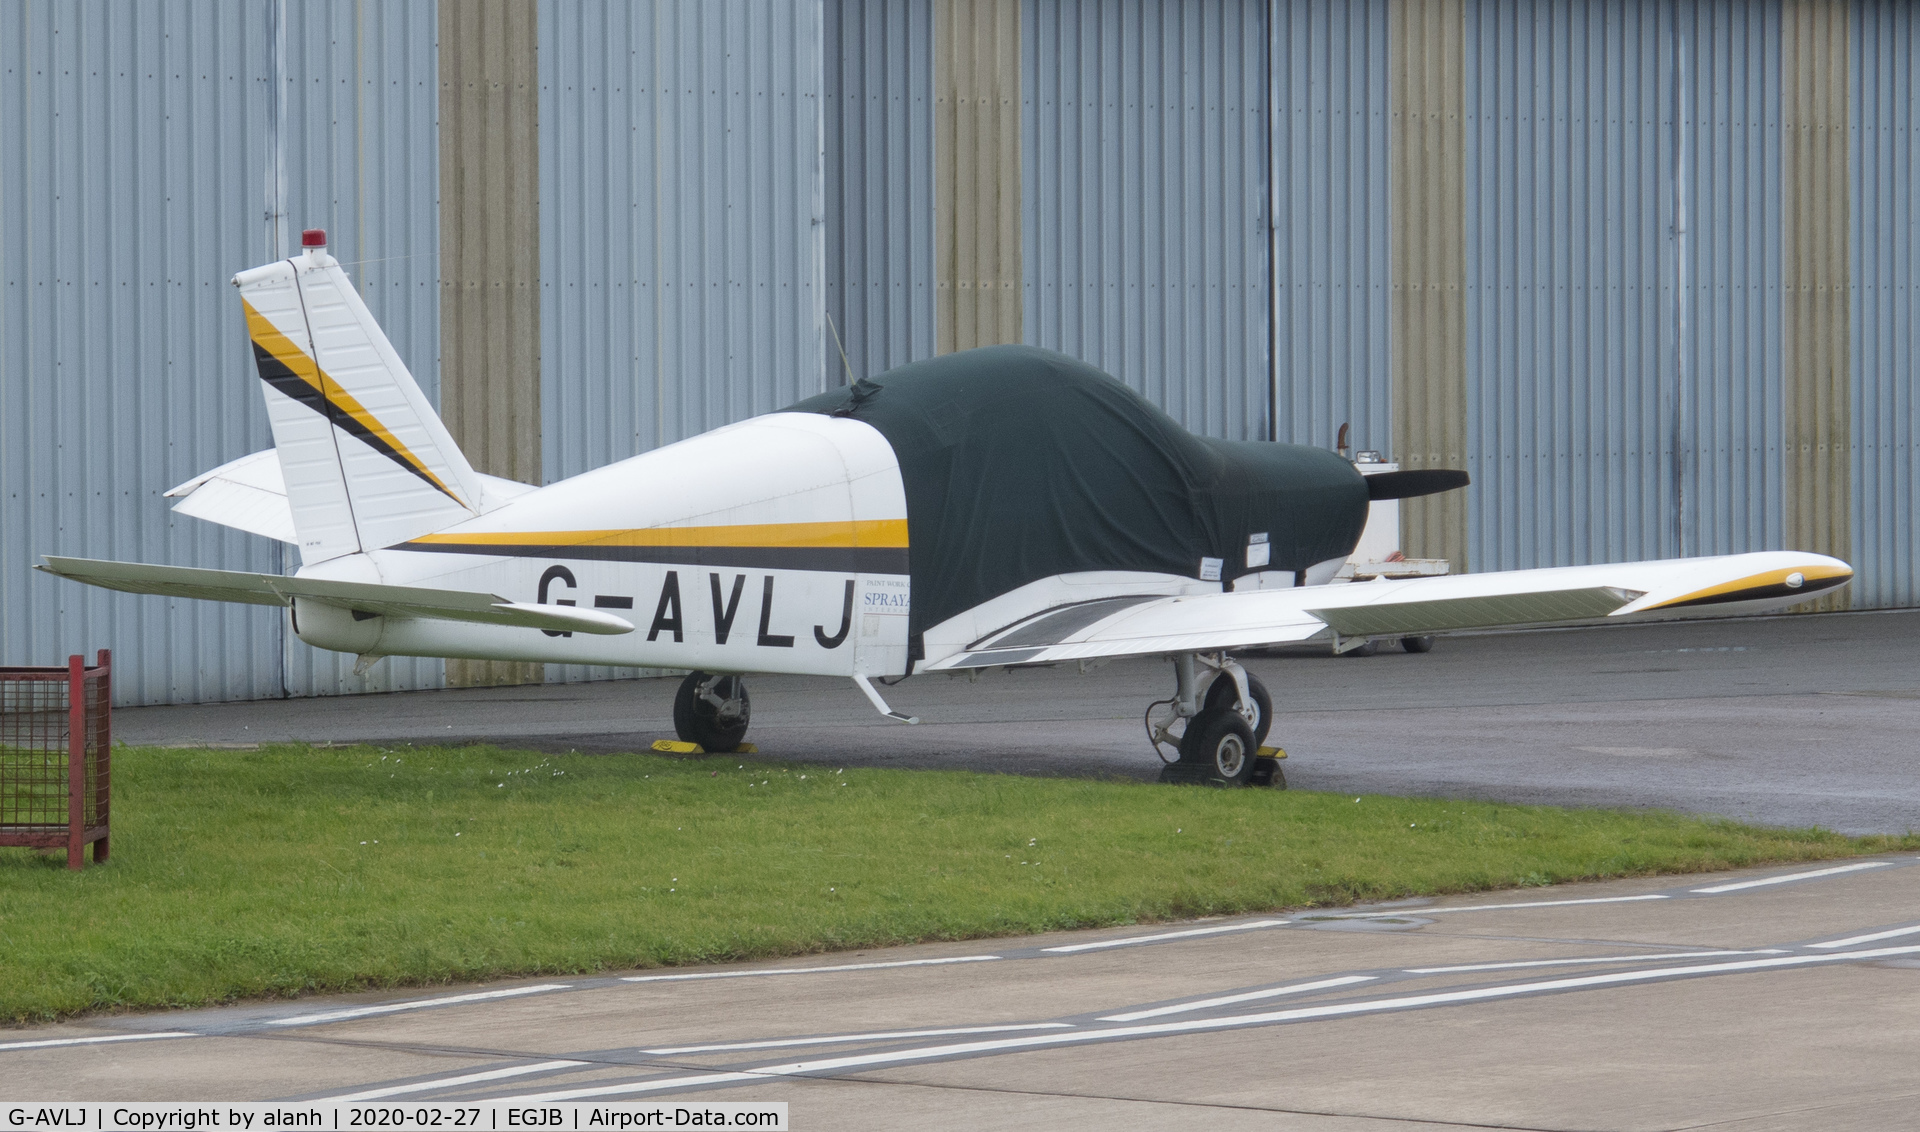 G-AVLJ, 1967 Piper PA-28-140 Cherokee C/N 28-23393, Parked outside the ASG hangar, Guernsey